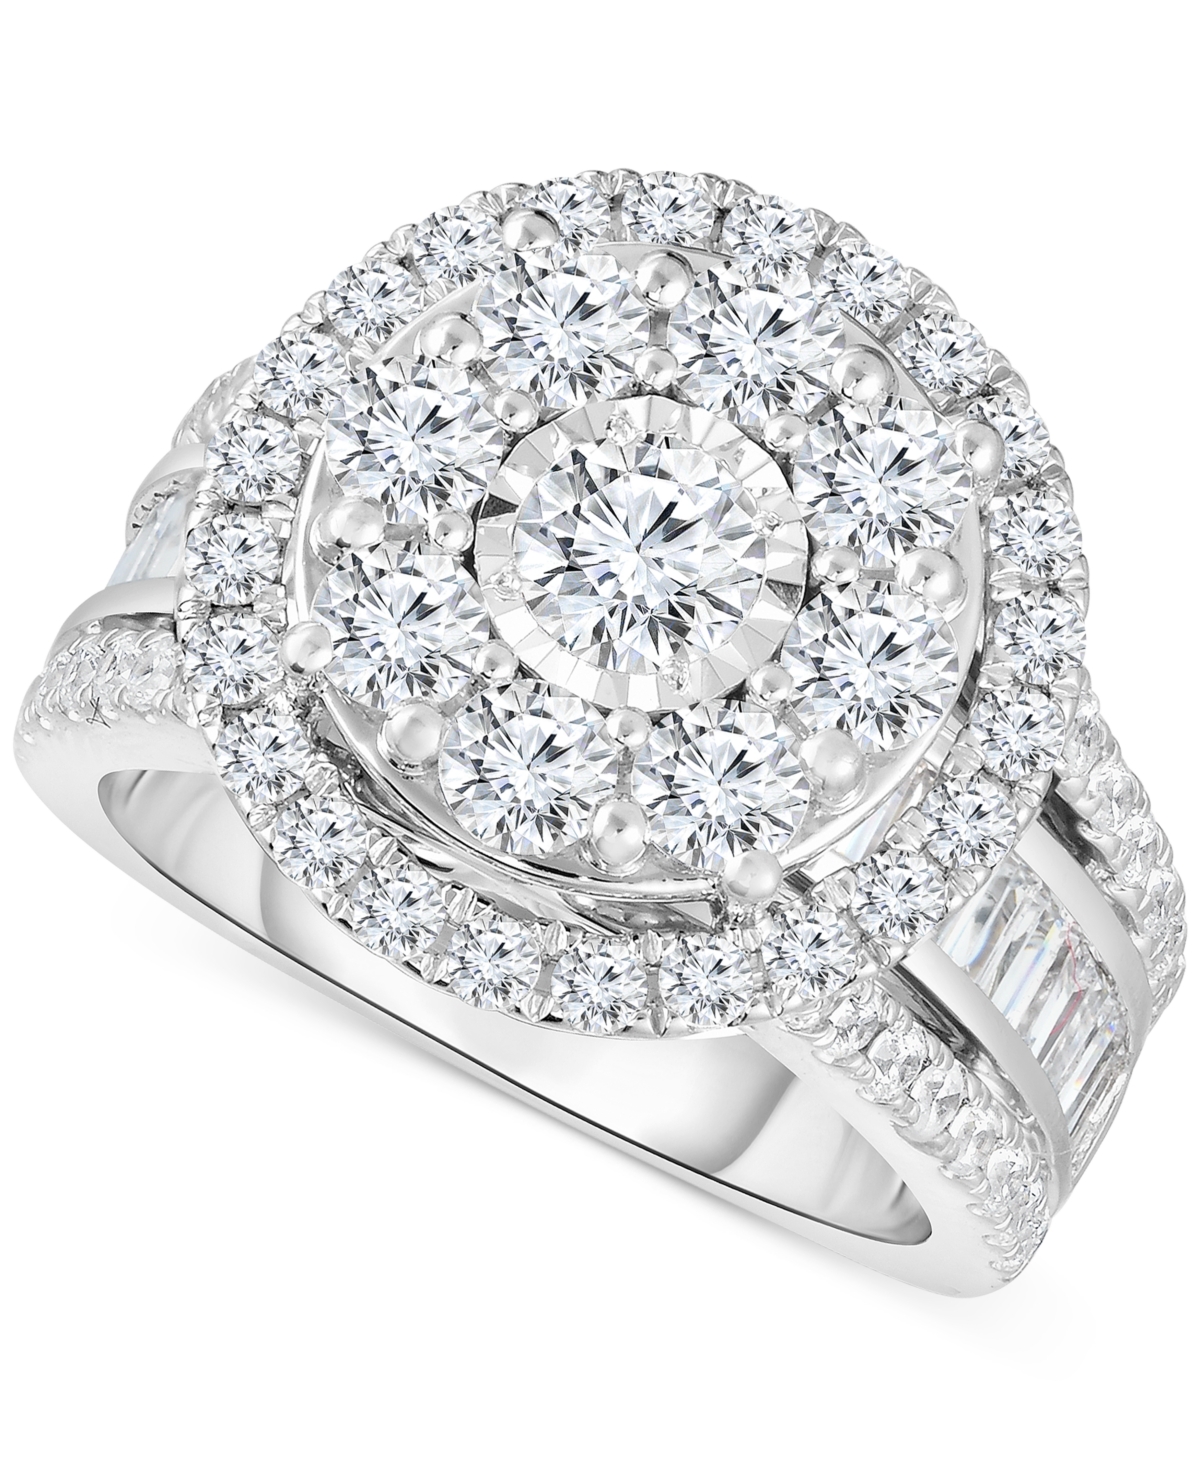 Diamond Cluster Engagement Ring (3 ct. t.w.) in 10k White Gold - White Gold